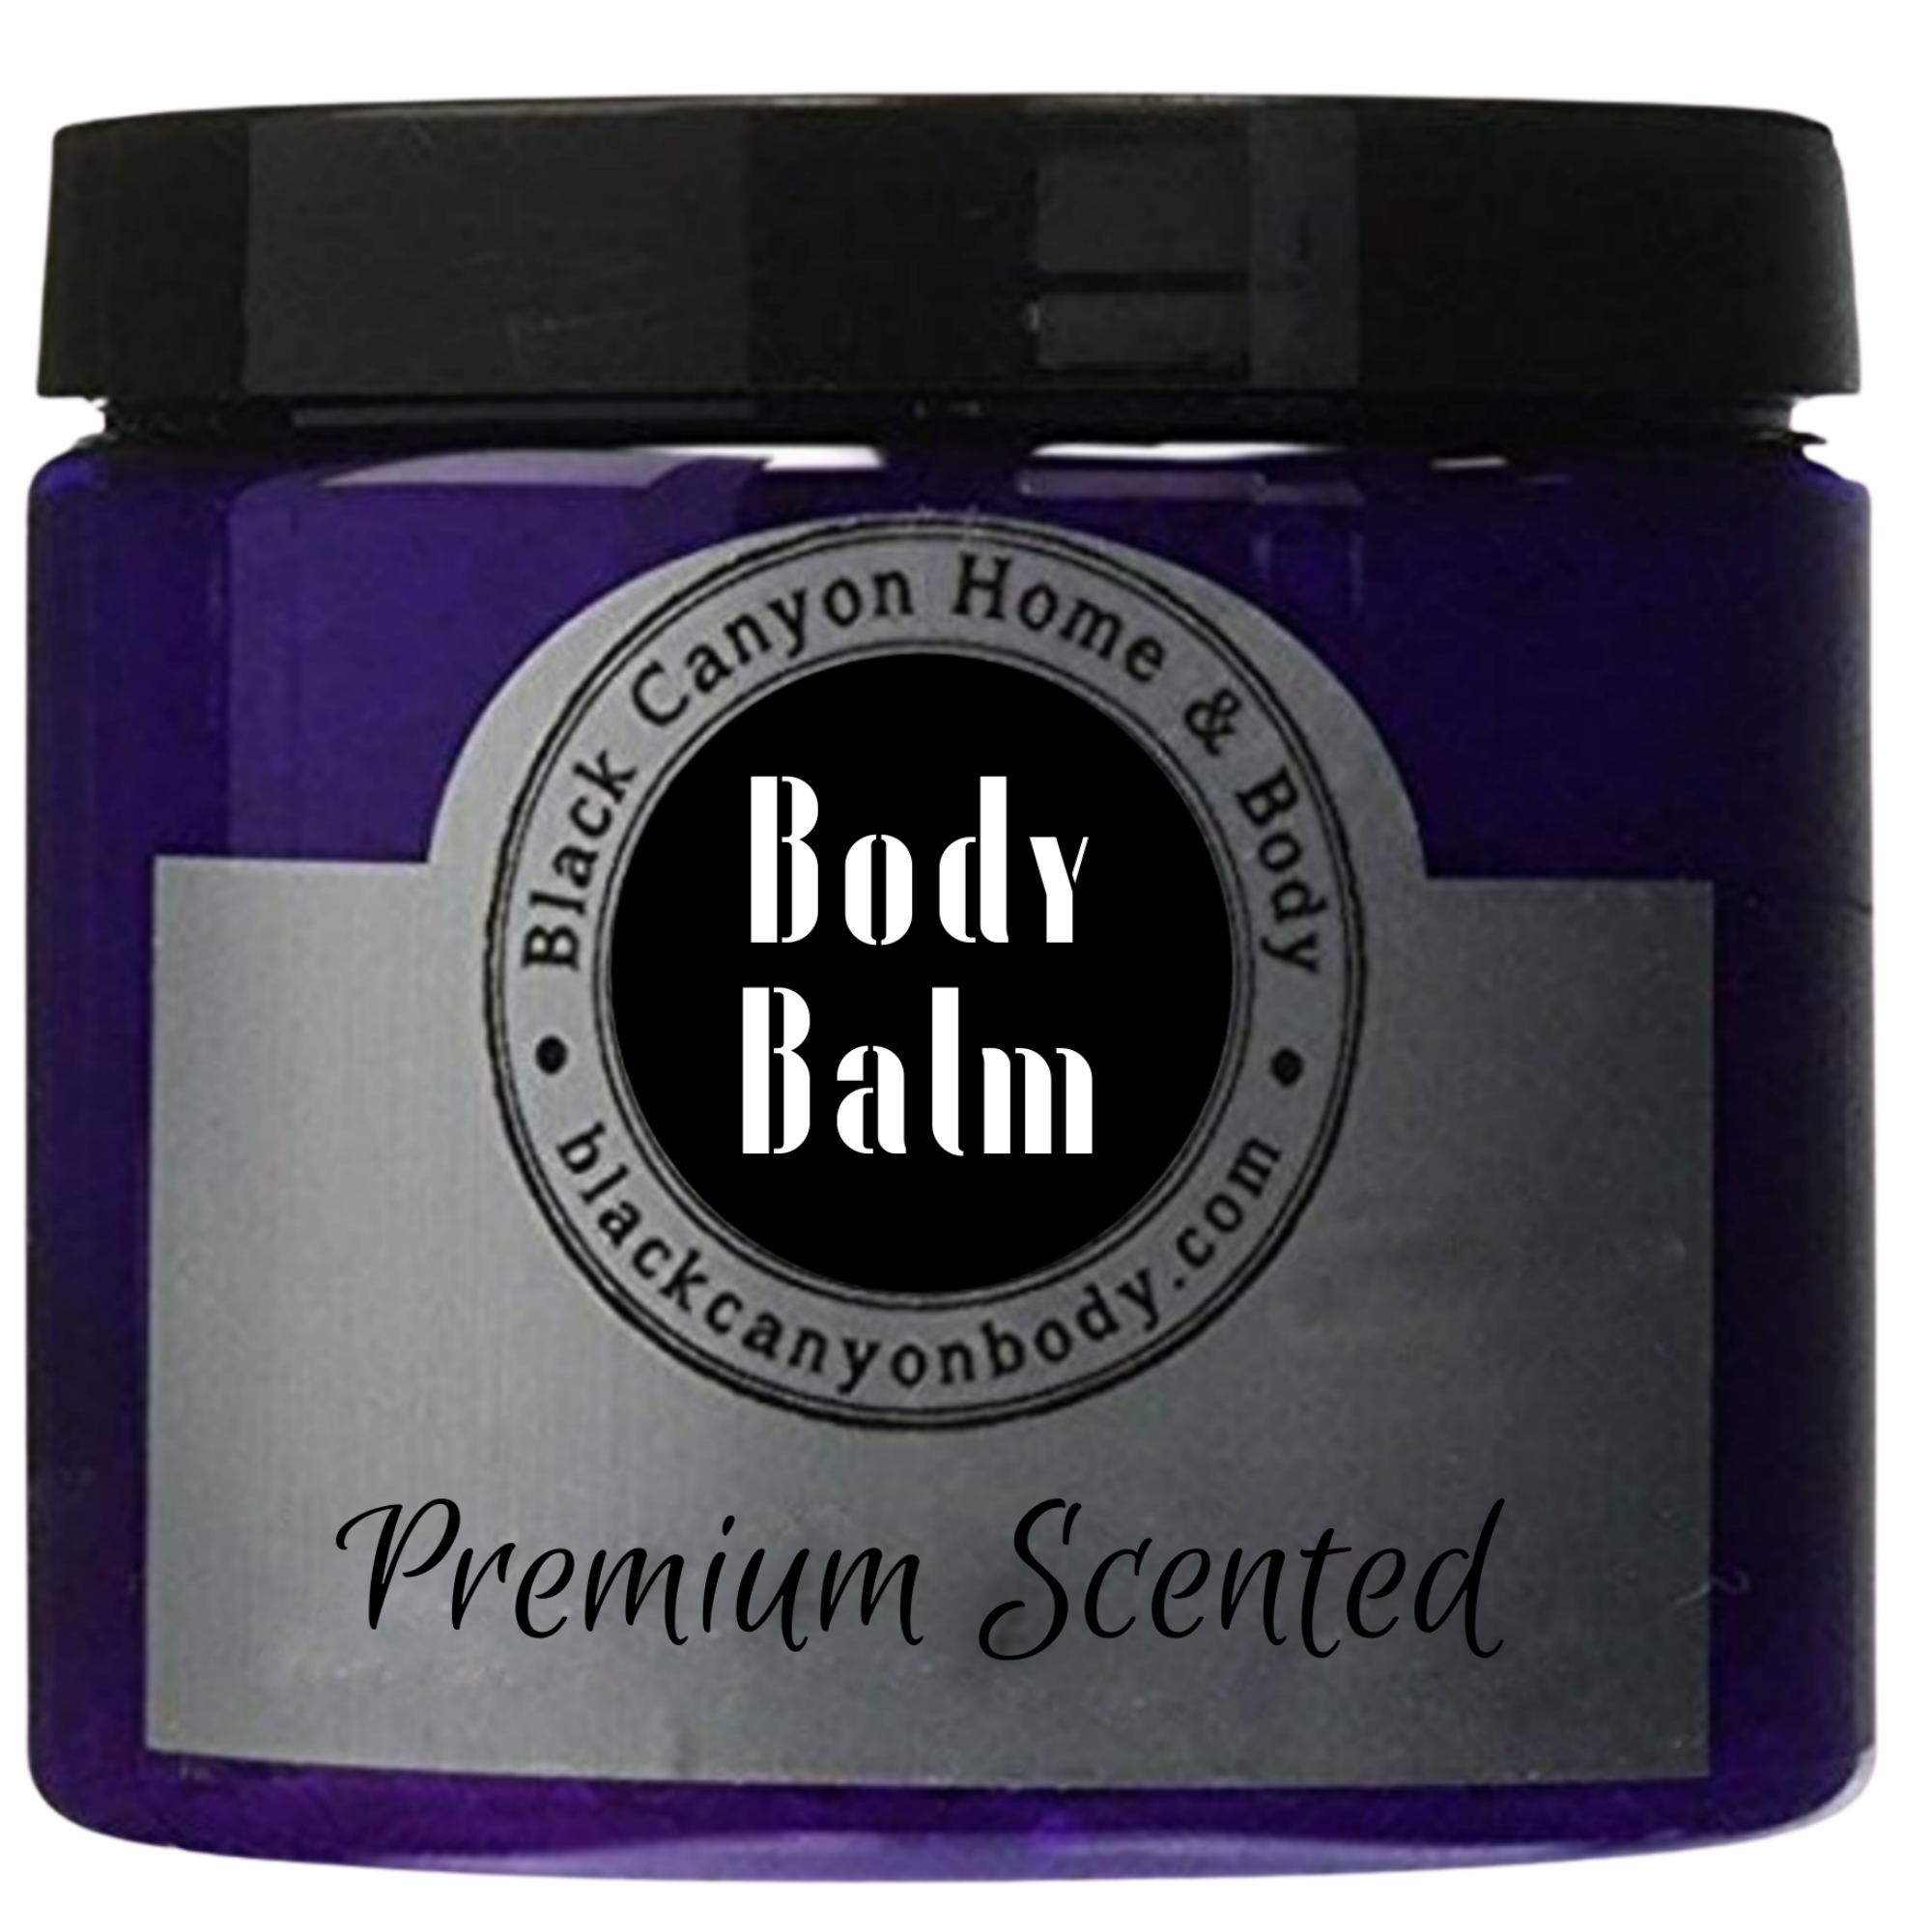 Black Canyon Berry Patch Scented Natural Body Balm with Shea